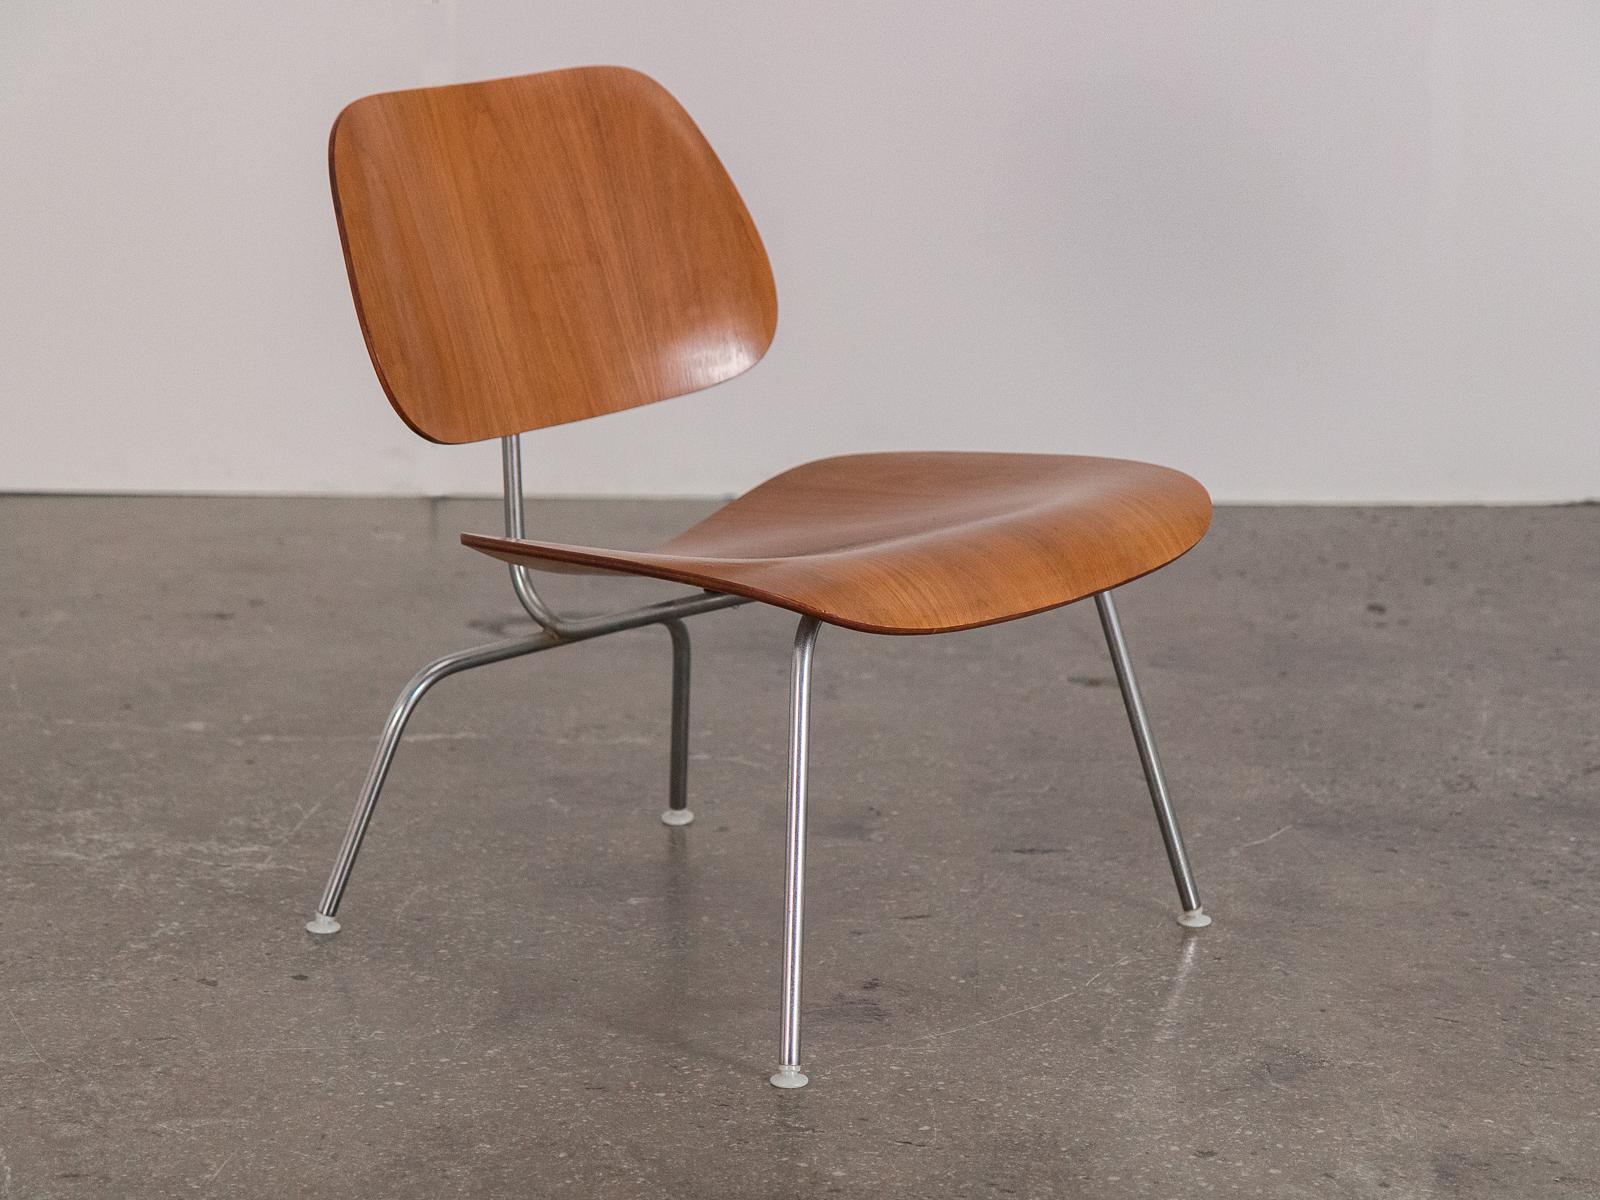 1960s walnut molded plywood LCM chair by Charles and Ray Eames for Herman Miller. Walnut wood has a lovely patina throughout, and areas of wear strike the perfect balance revealing the attractive grain underneath. Original polished chrome legs with